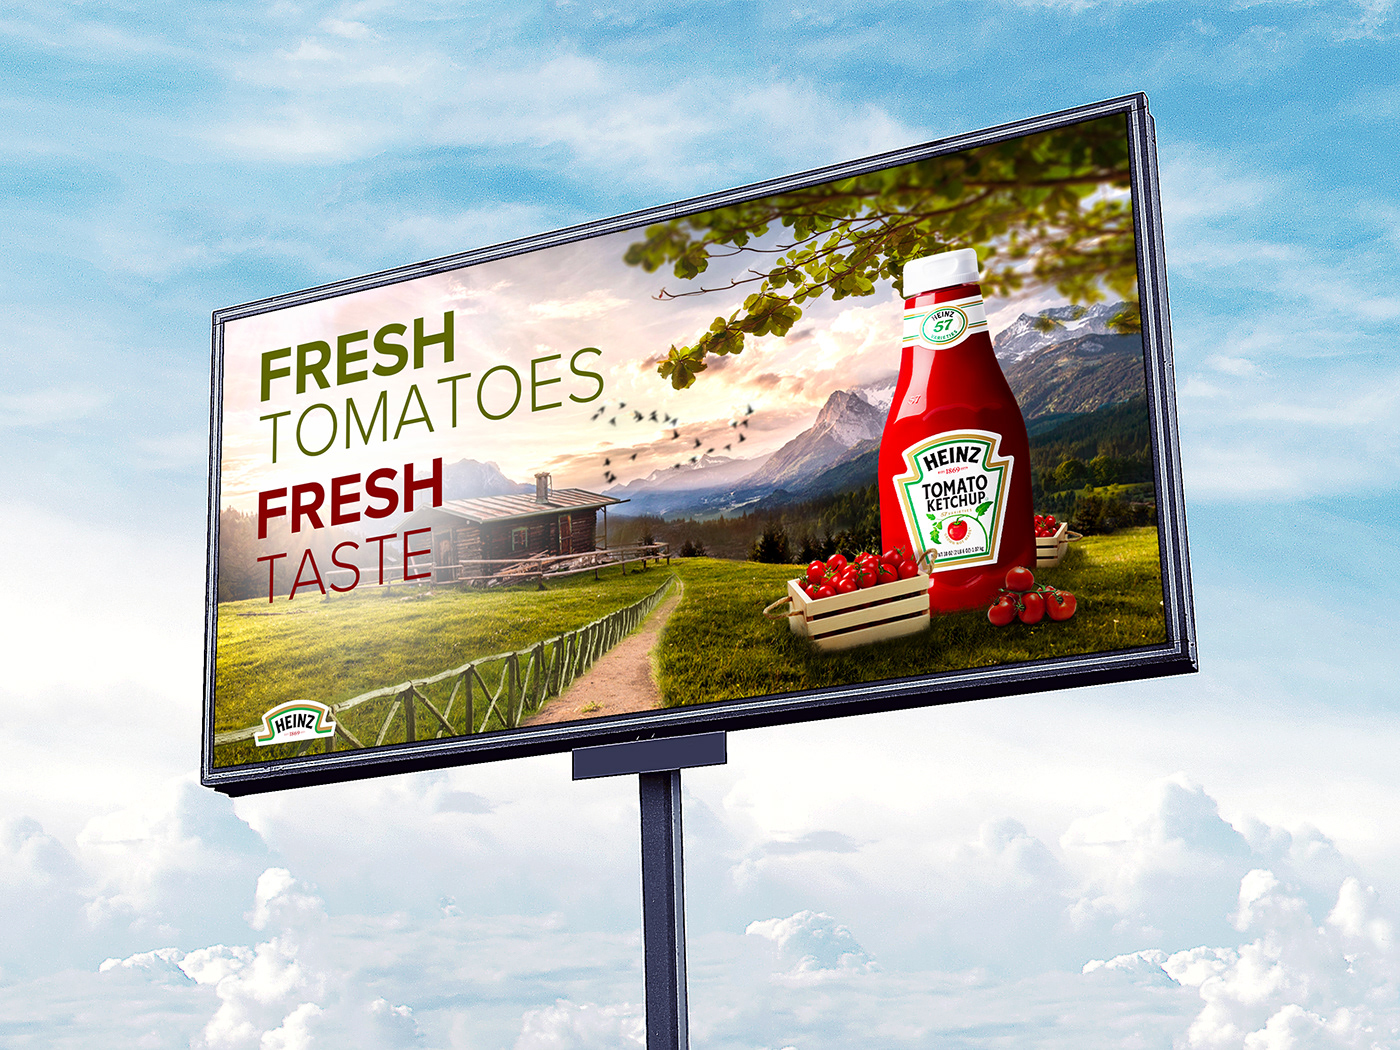 heinz poster billboard graphicdesign posterdesign product advertisingposter ketchup posmaterials rollup